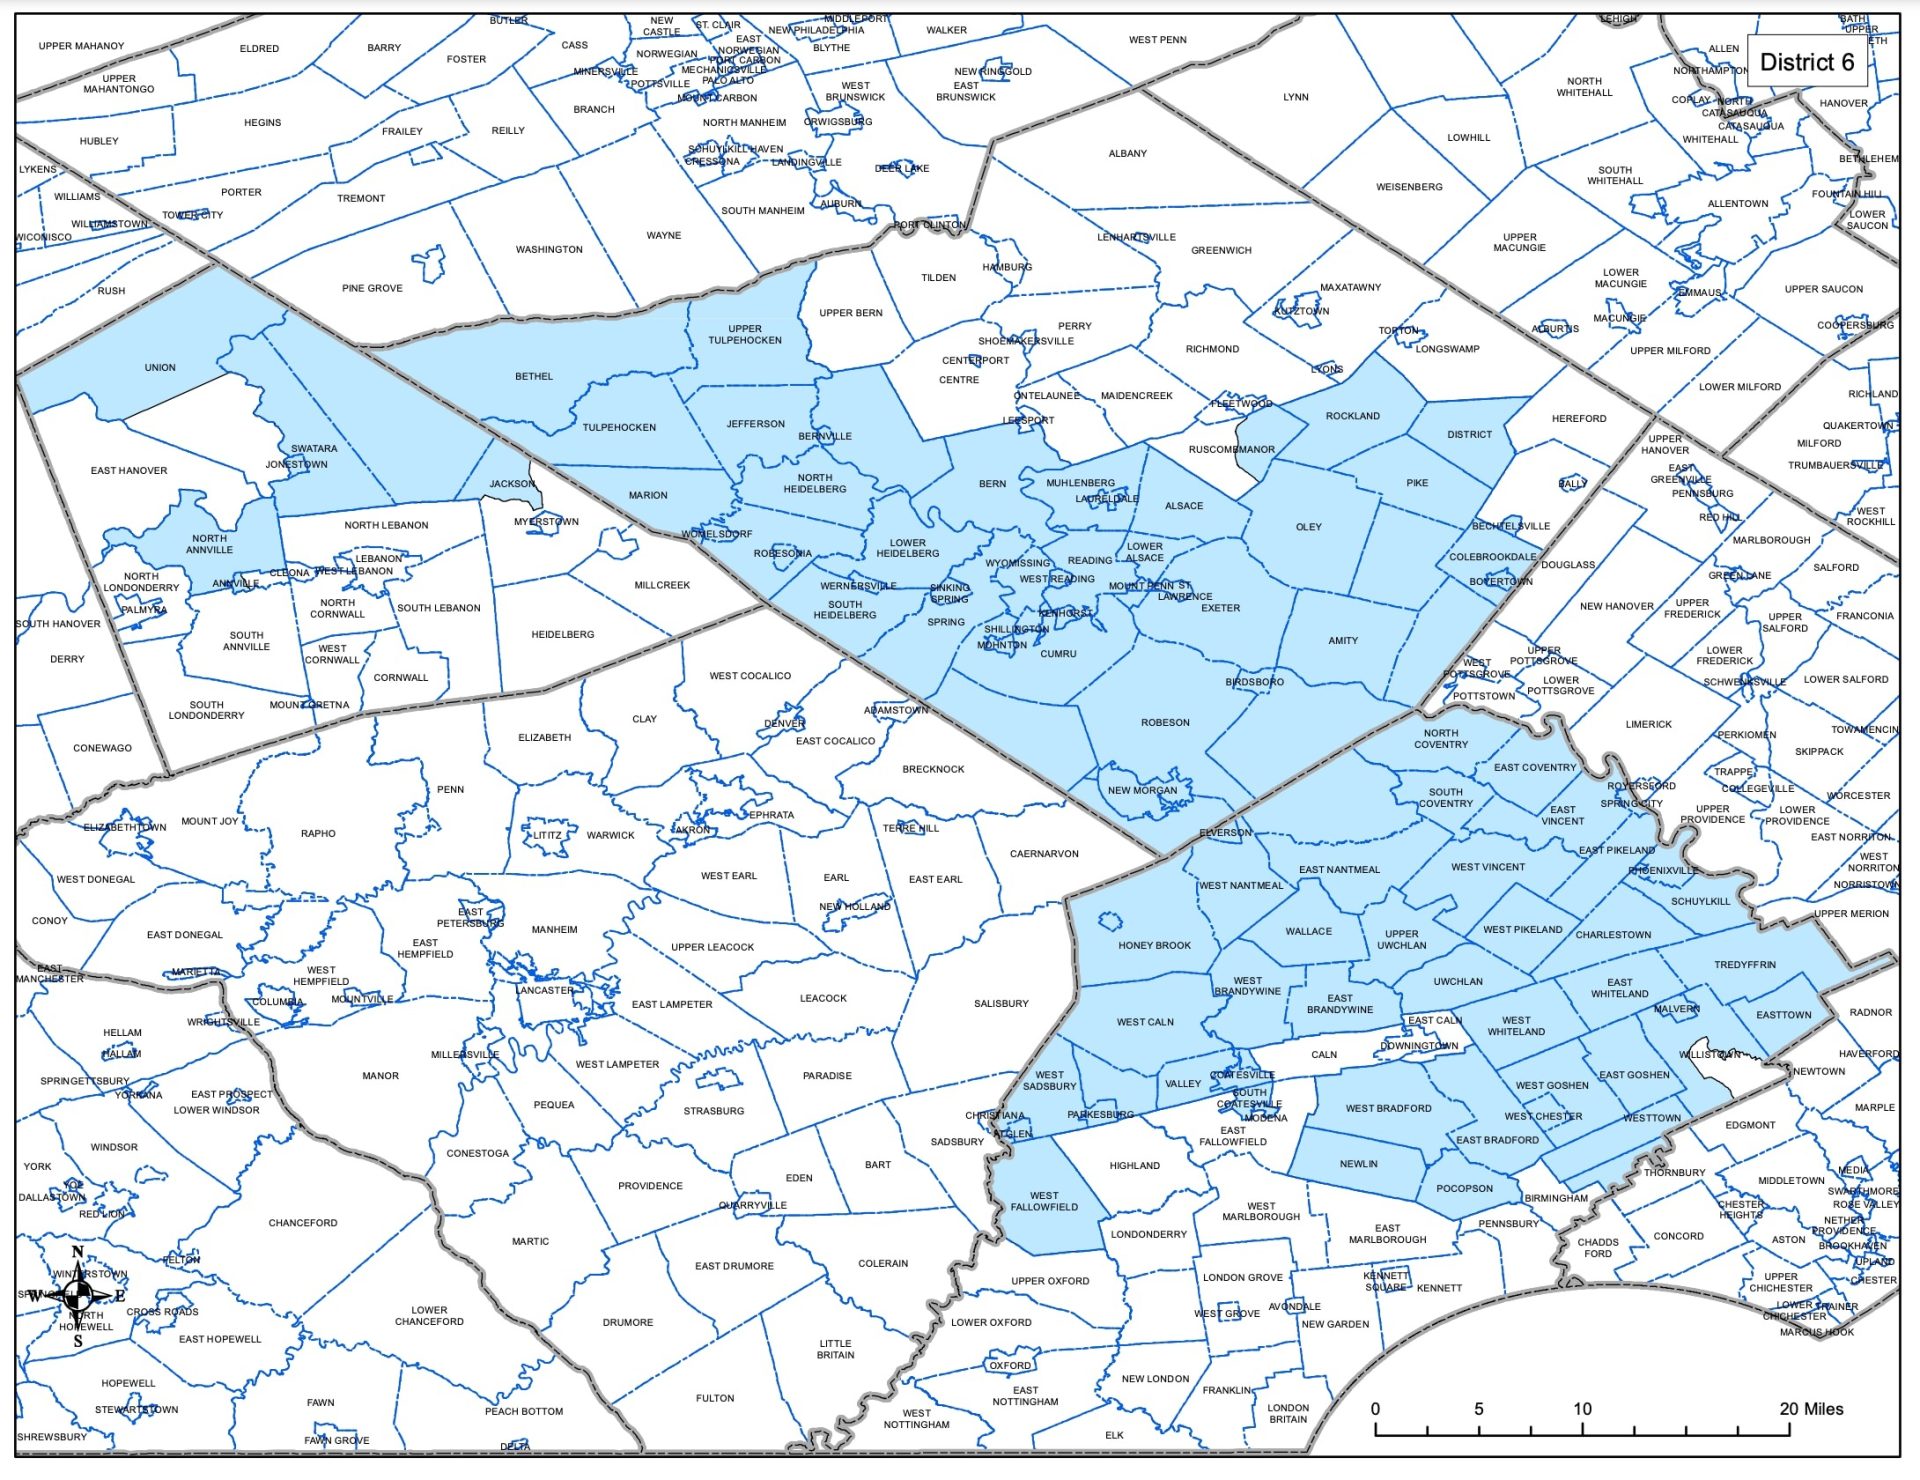 Proposed District 5 shows the consequence of prioritizing equal population and minimizing splits. The district is not compact and stretches across several counties.